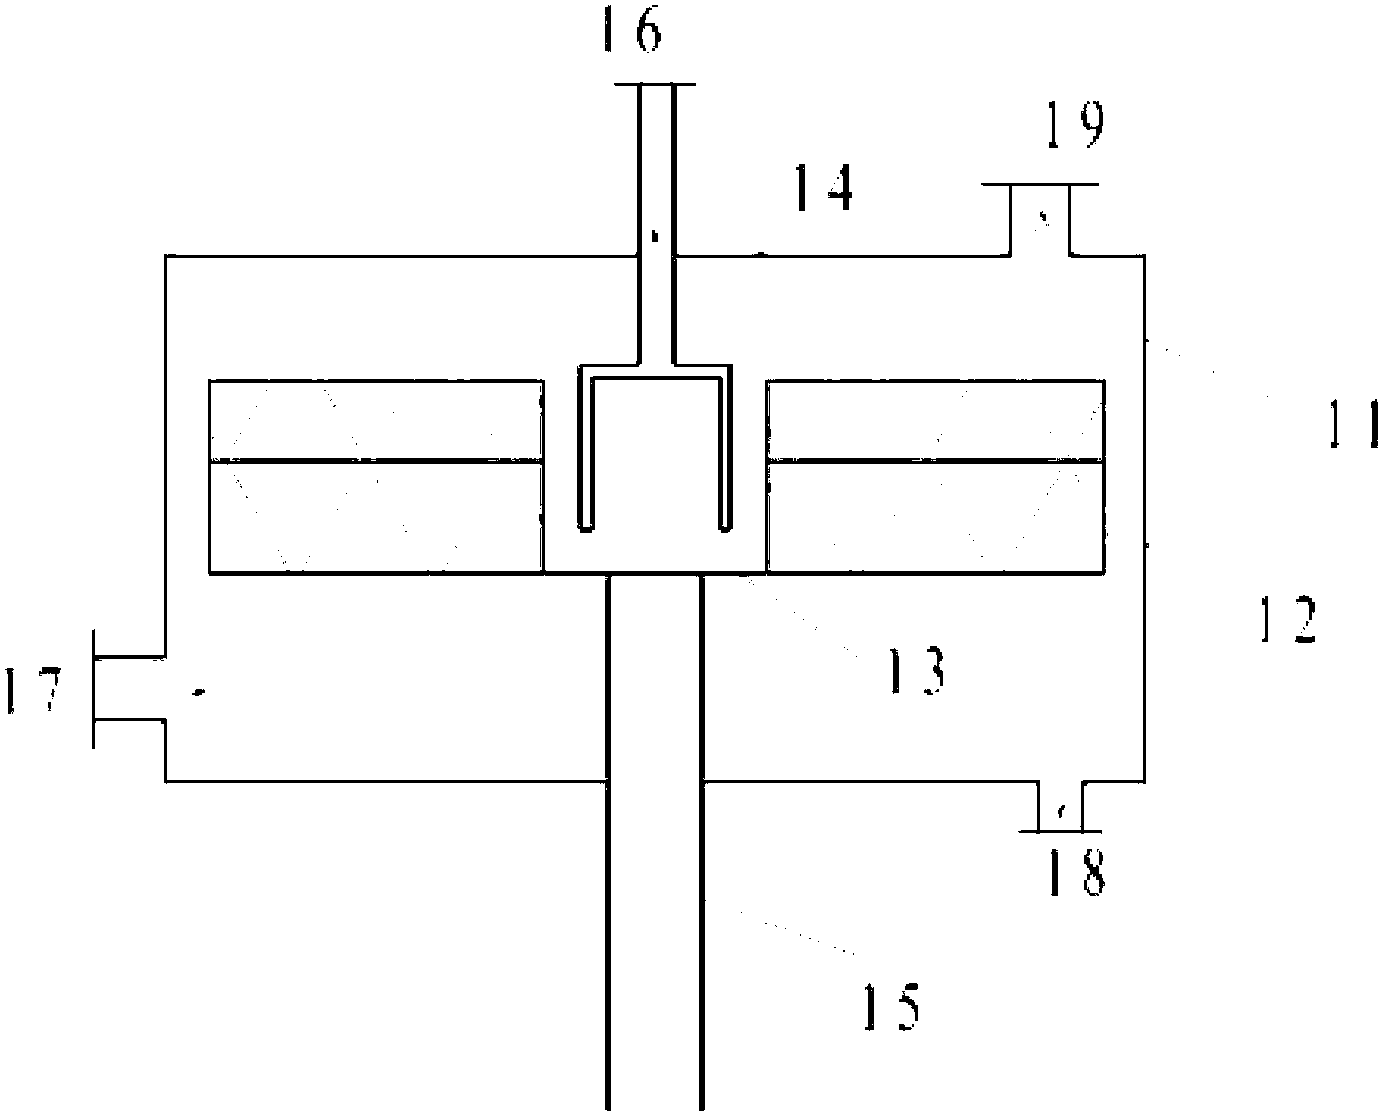 Enhanced oxidization device and method used for organic wastewater treatment